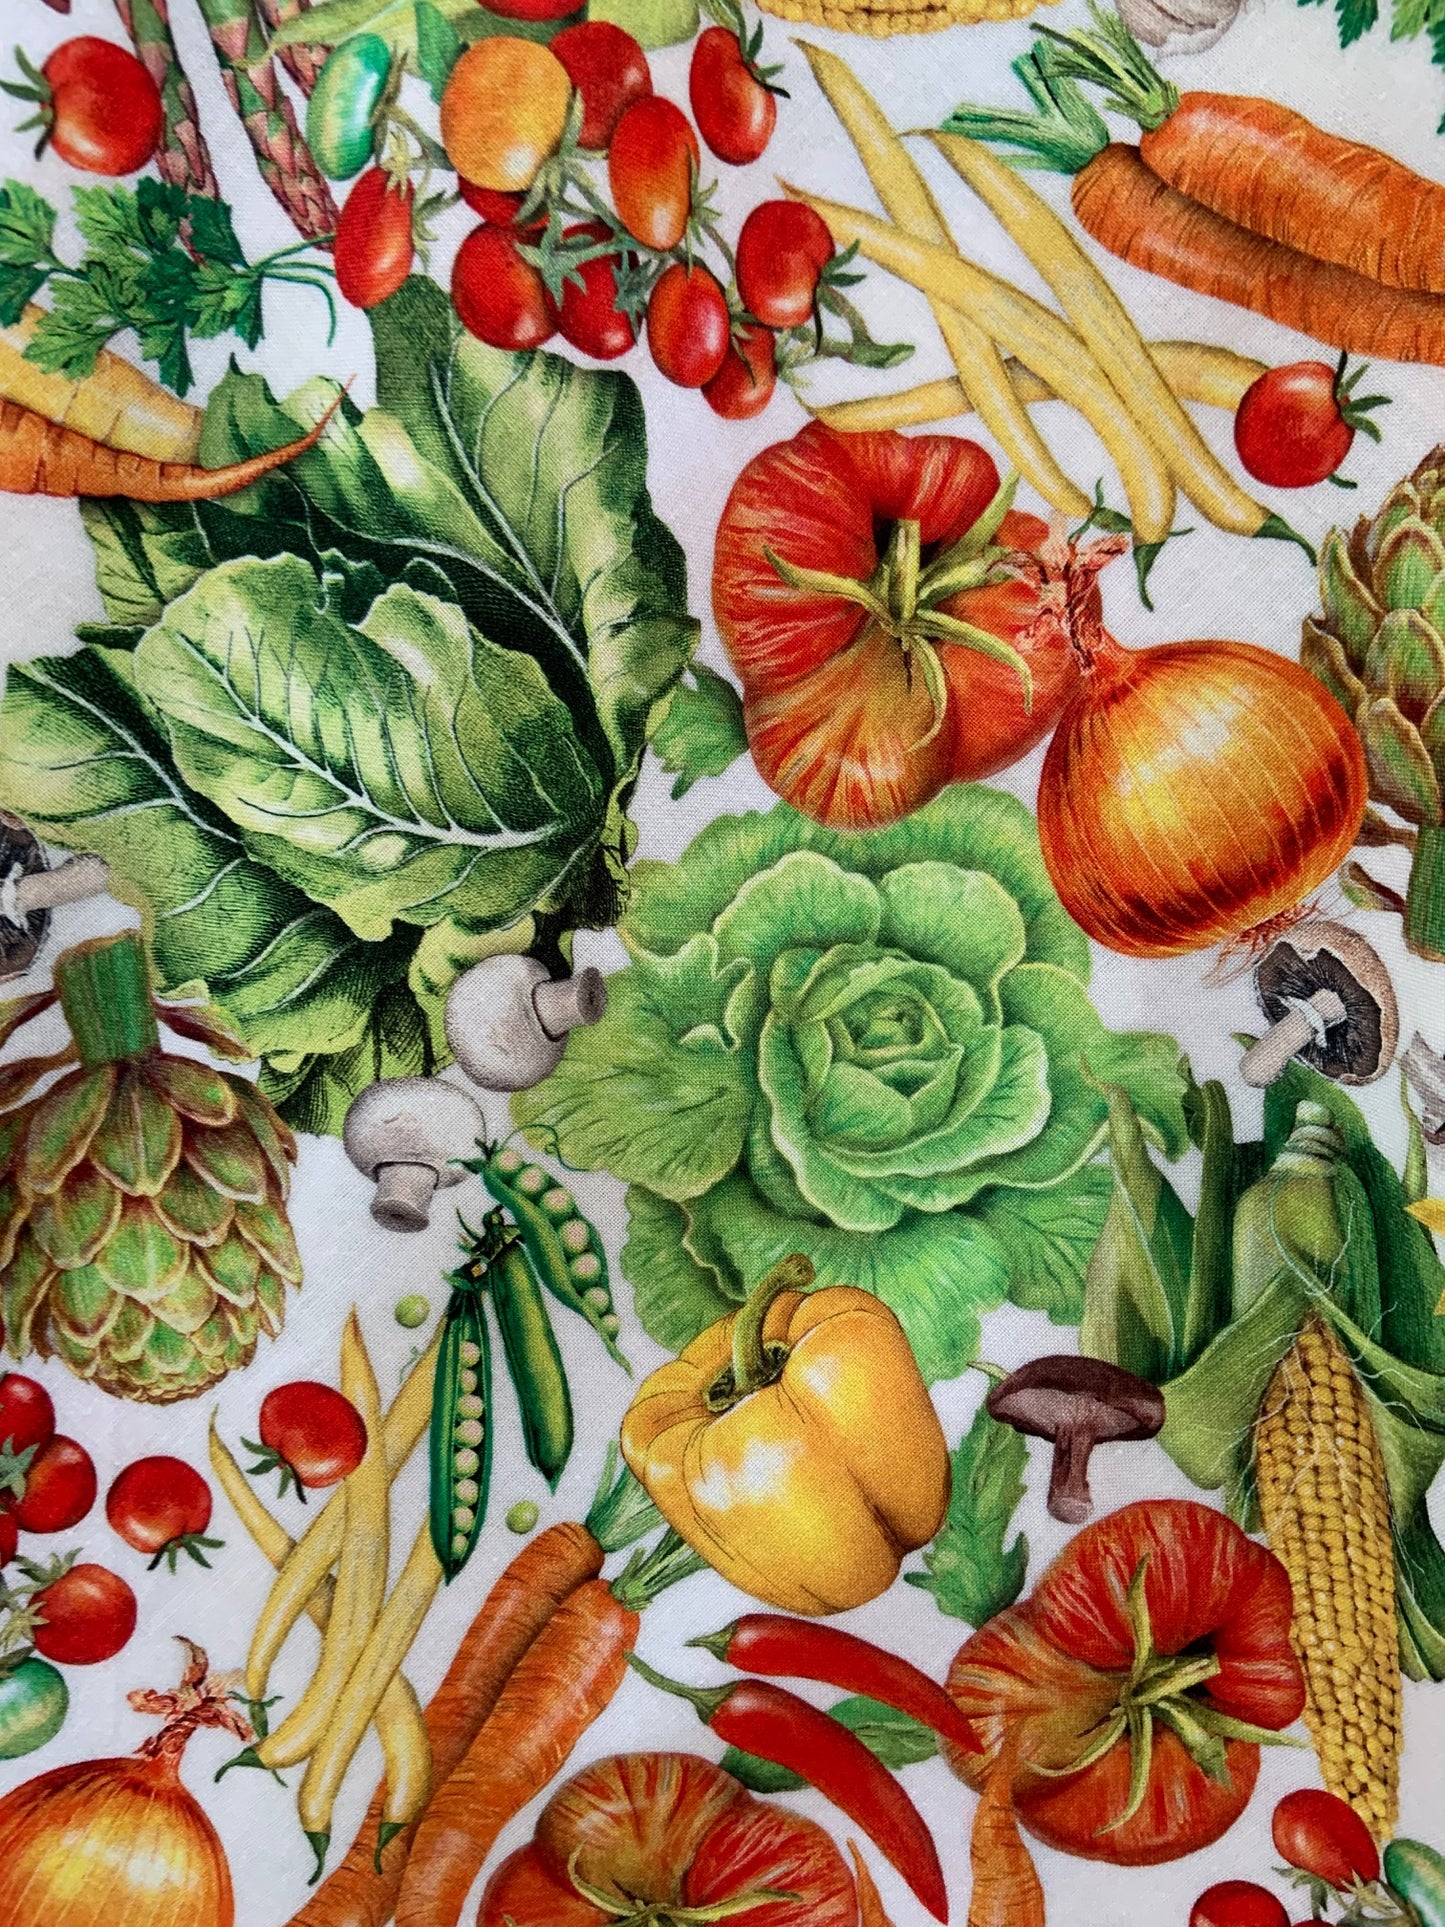 a close up of the fabric showing the tossed veggies on a white background